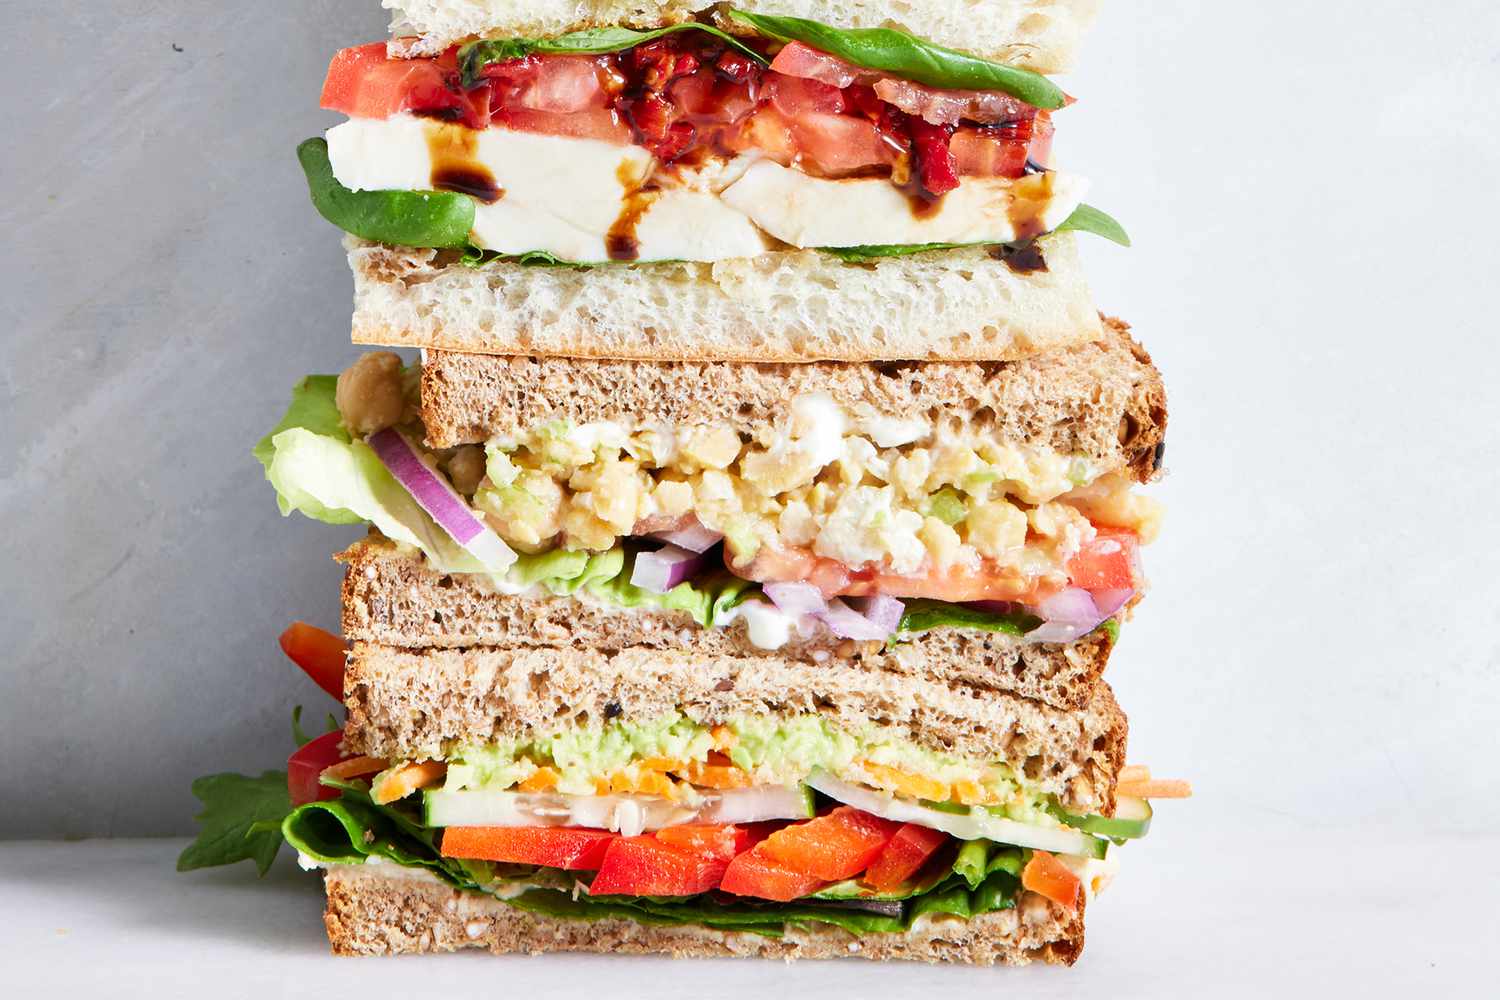 stack of vegetable sandwiches